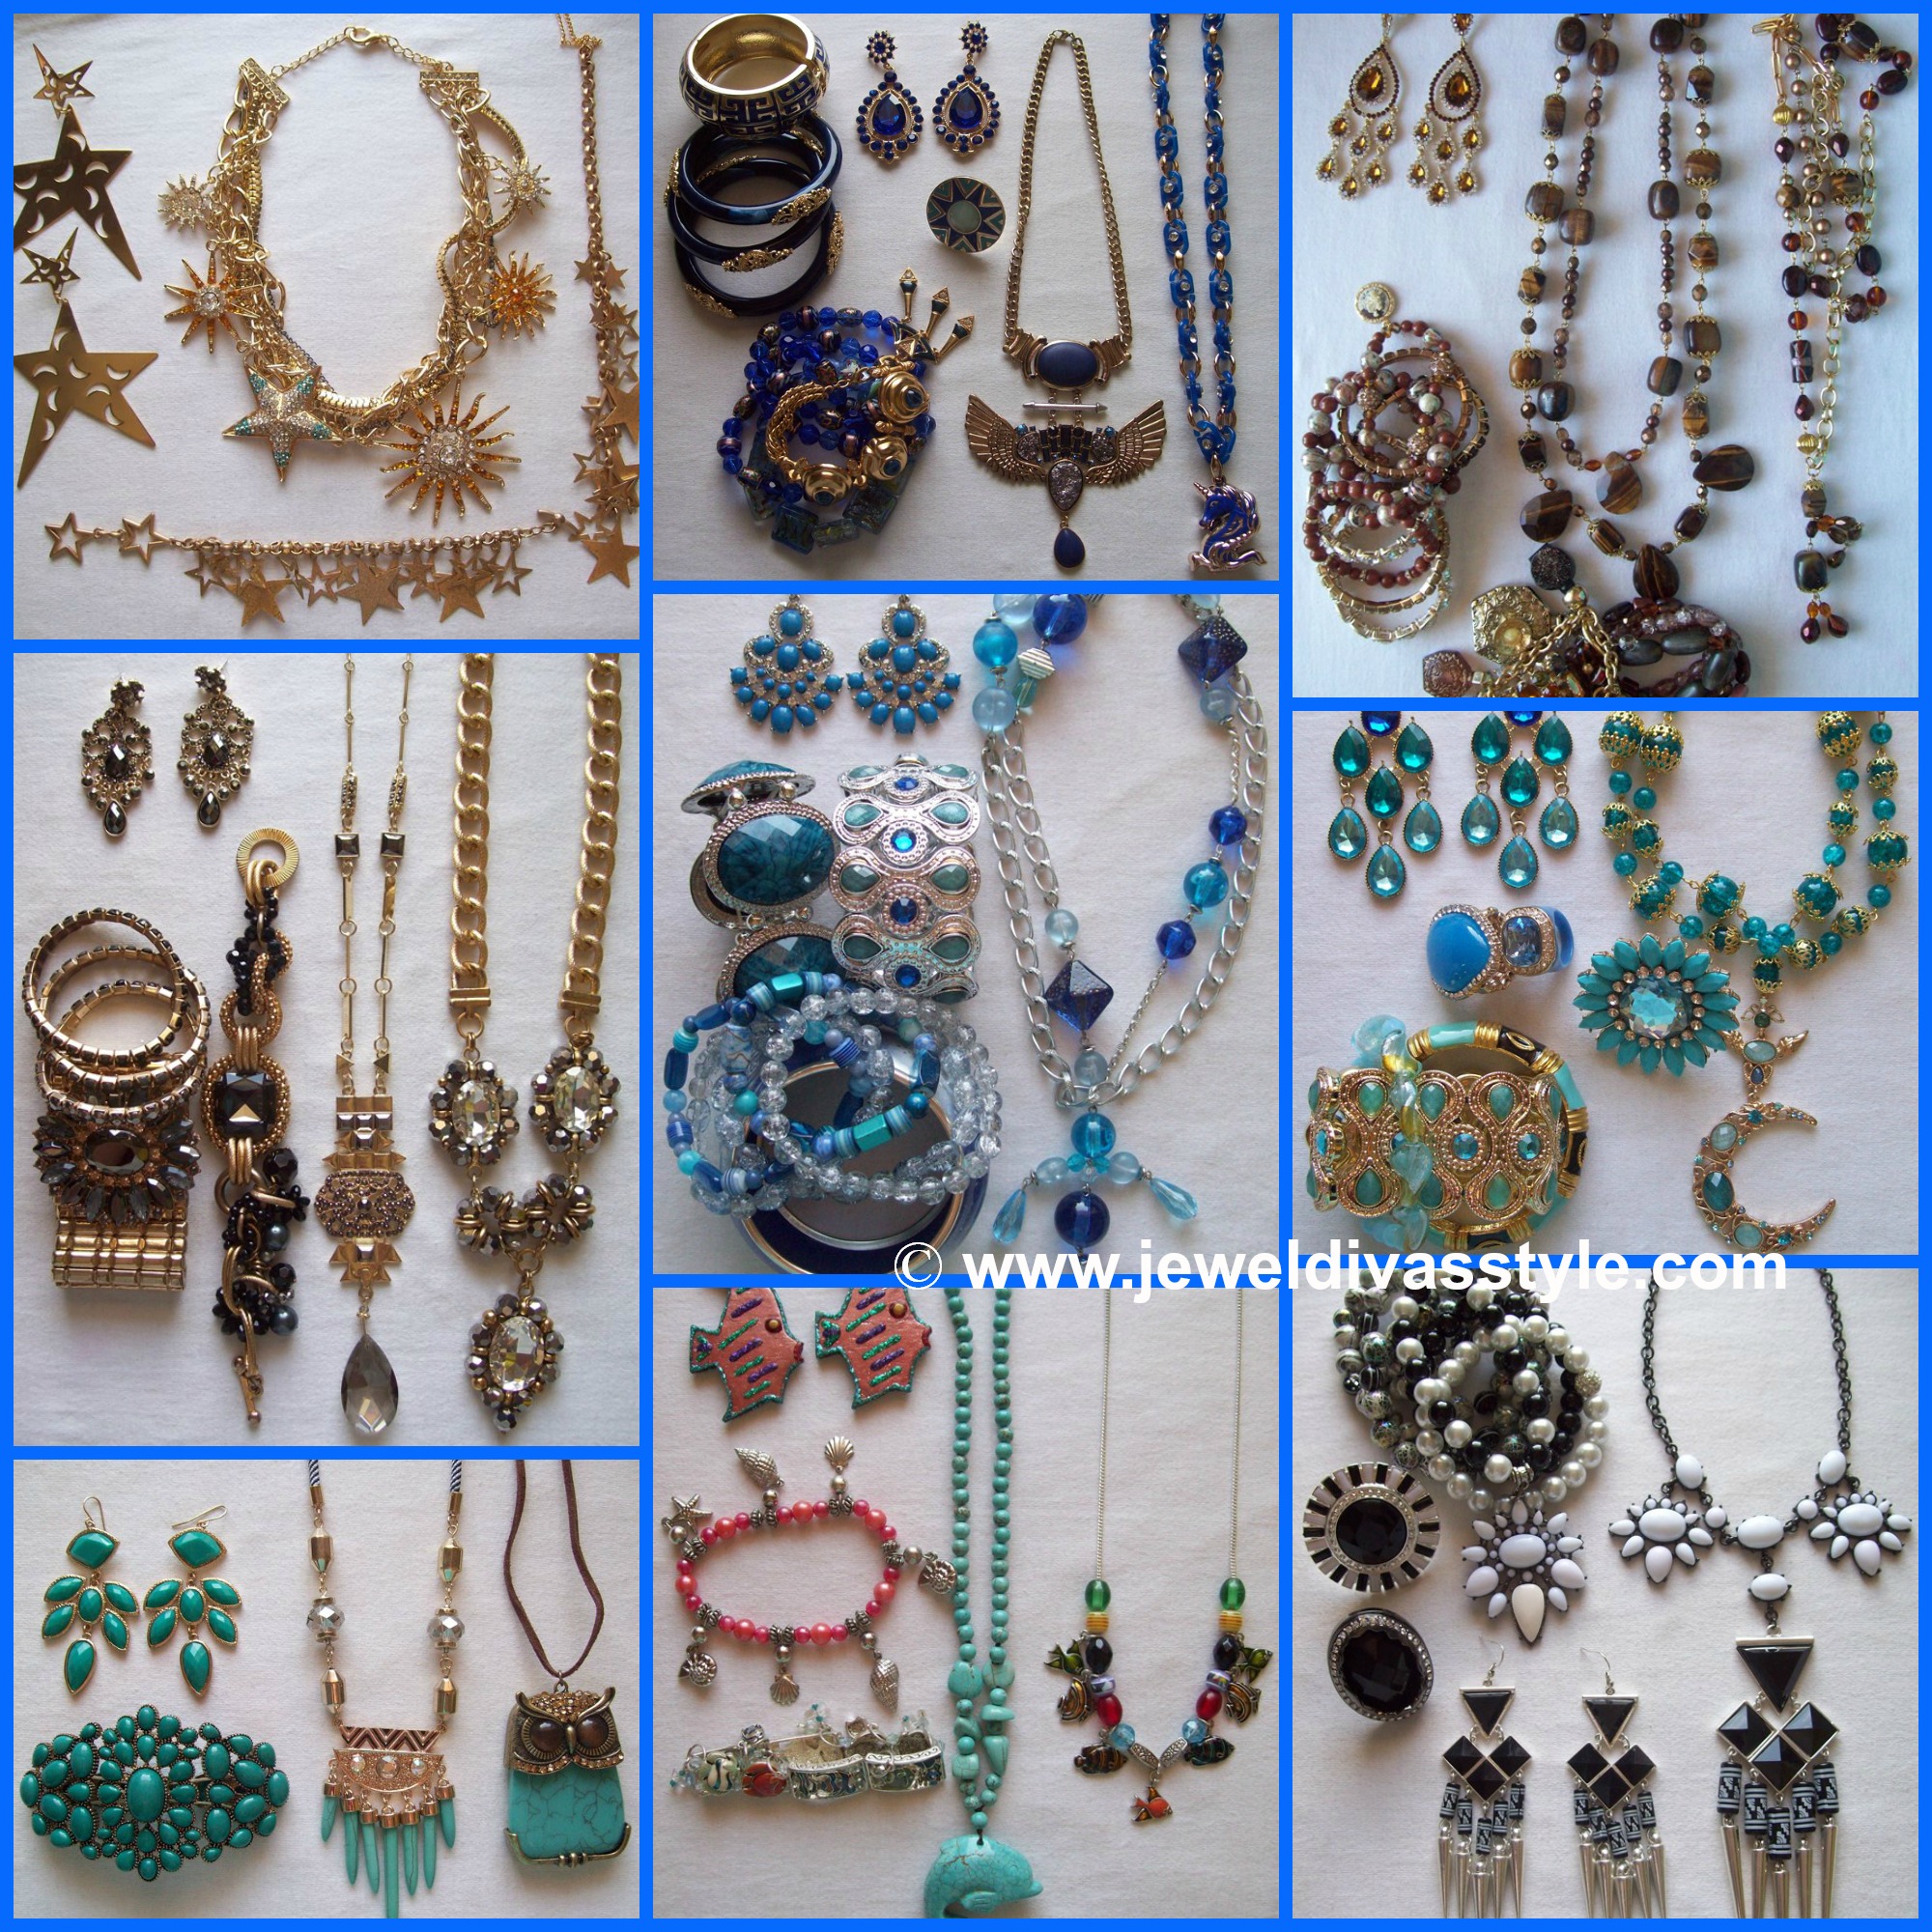 JEWEL DIVAS STYLE PERSONAL JEWELLERY COLLECTION